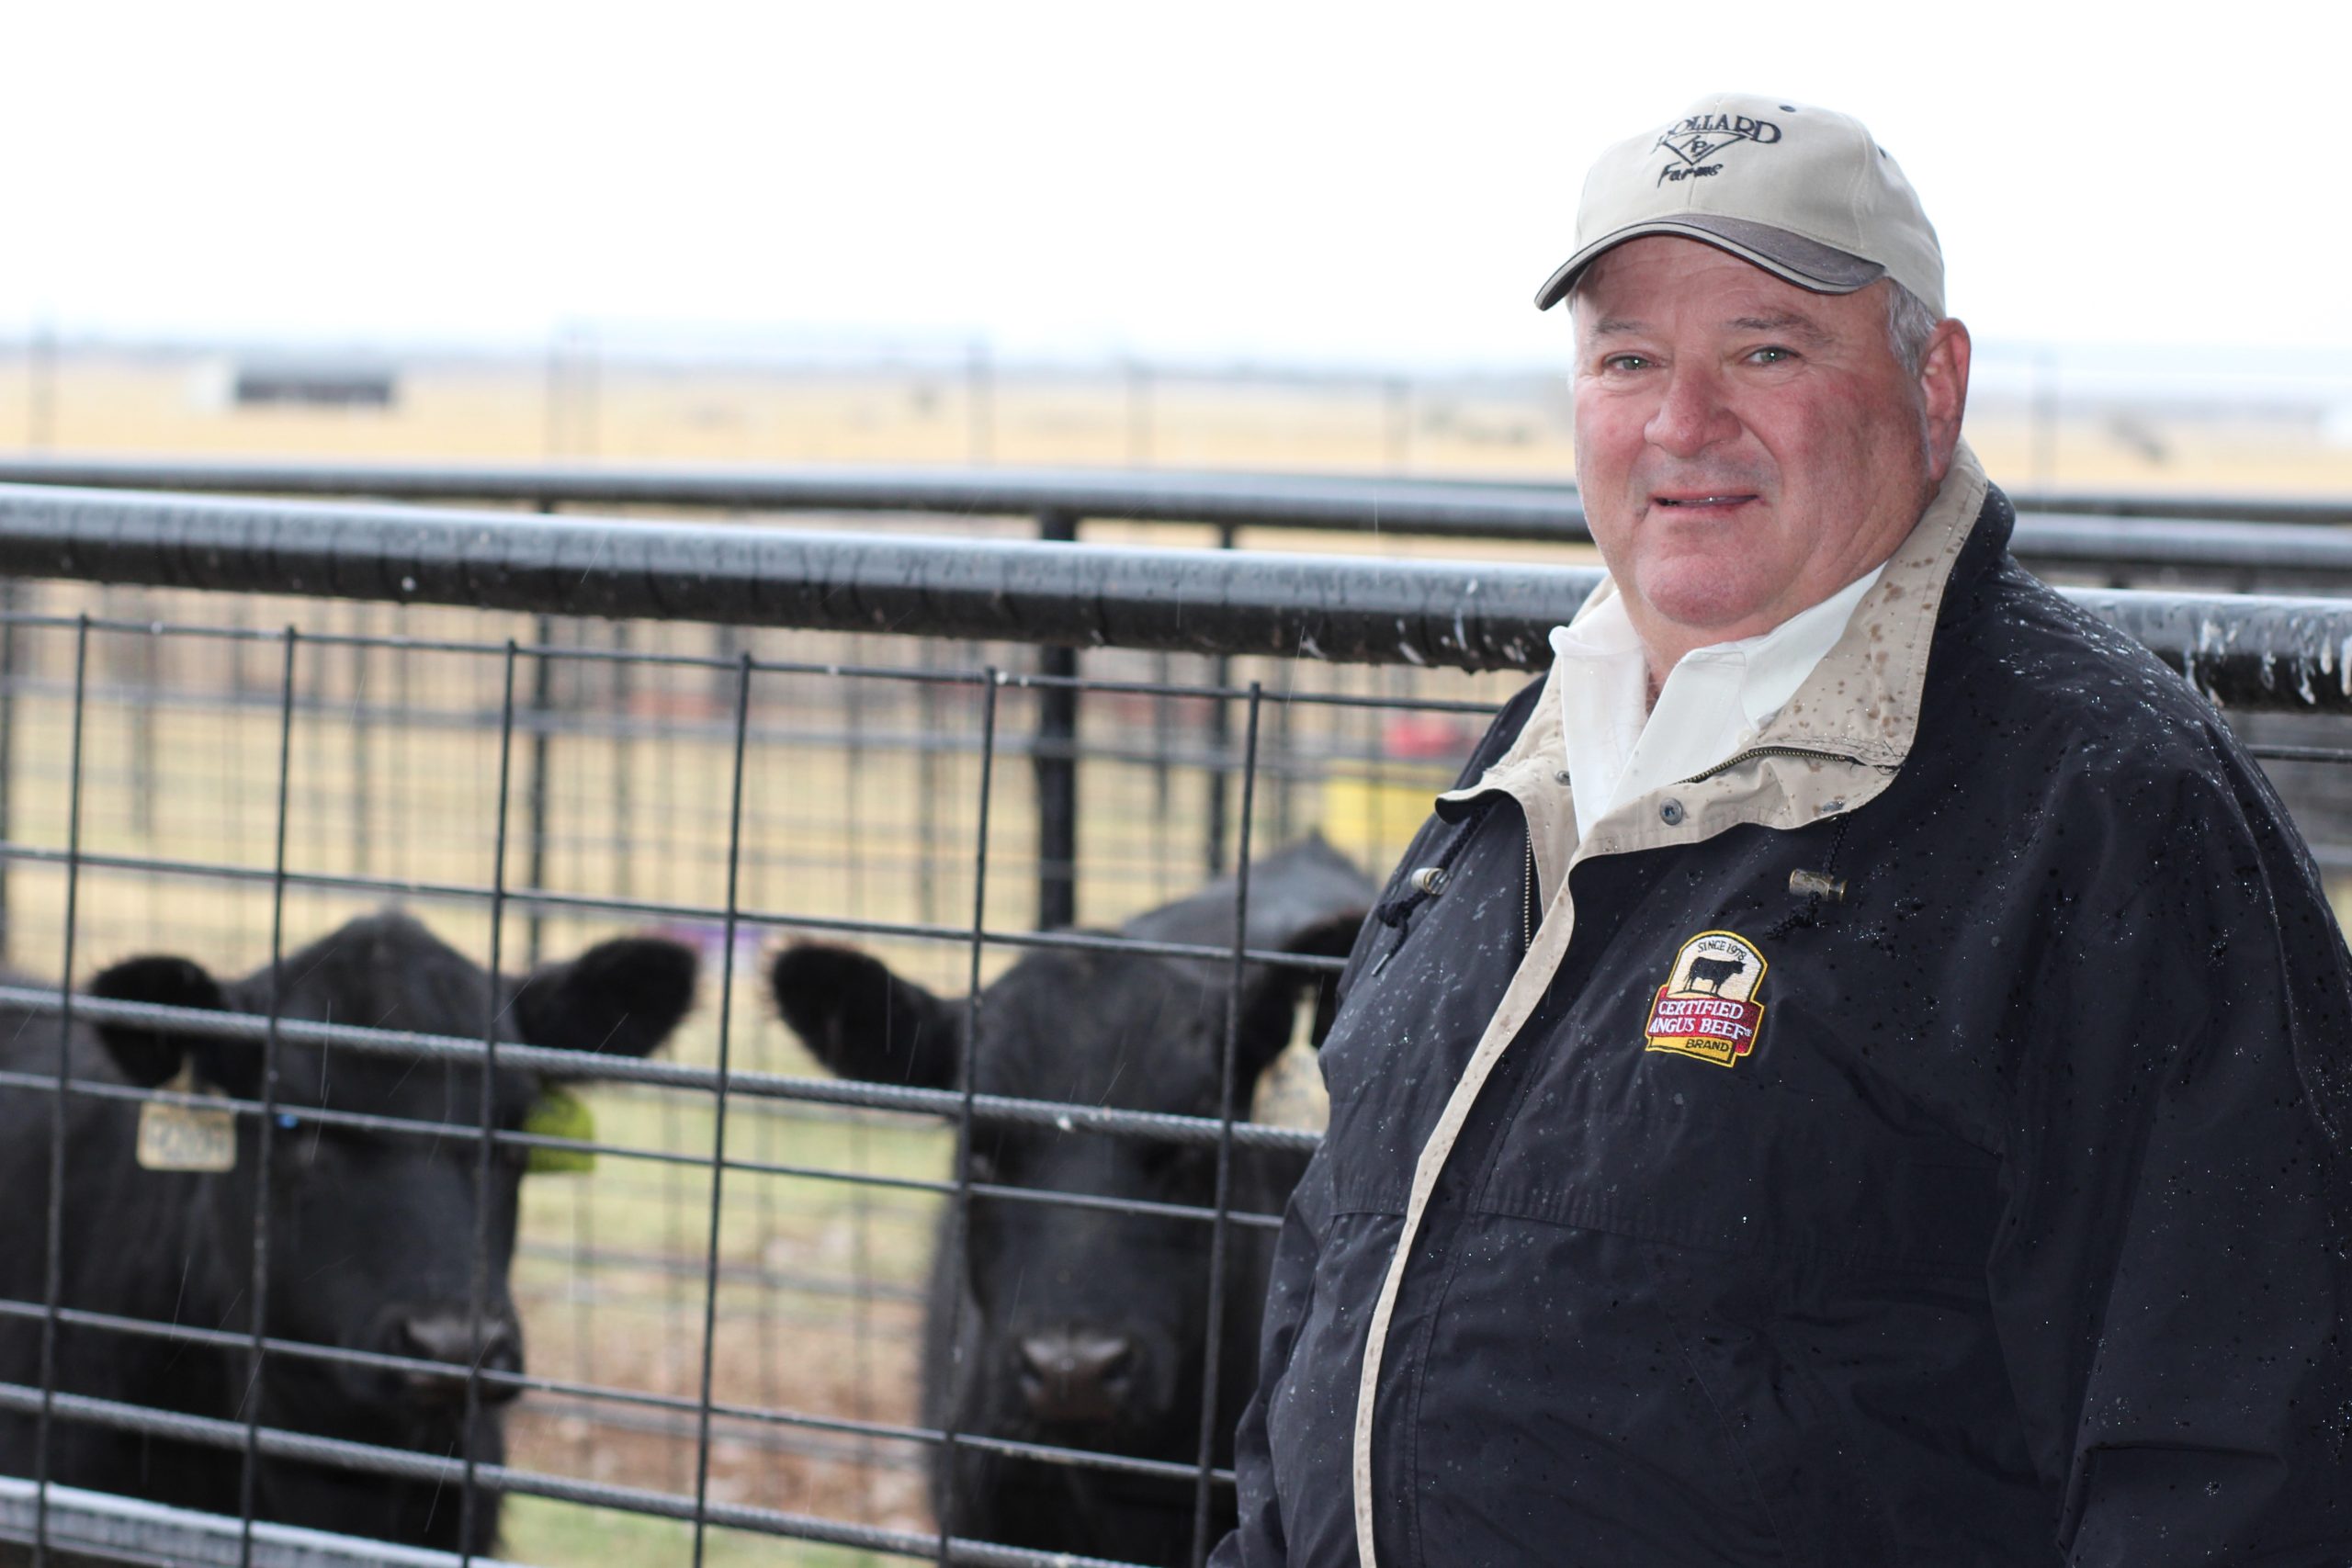 Dr. Barry Pollard of Waukomis, Oklahoma, deals in high-quality Angus seed stock cattle. (Journal photo by Lacey Vilhauer.)